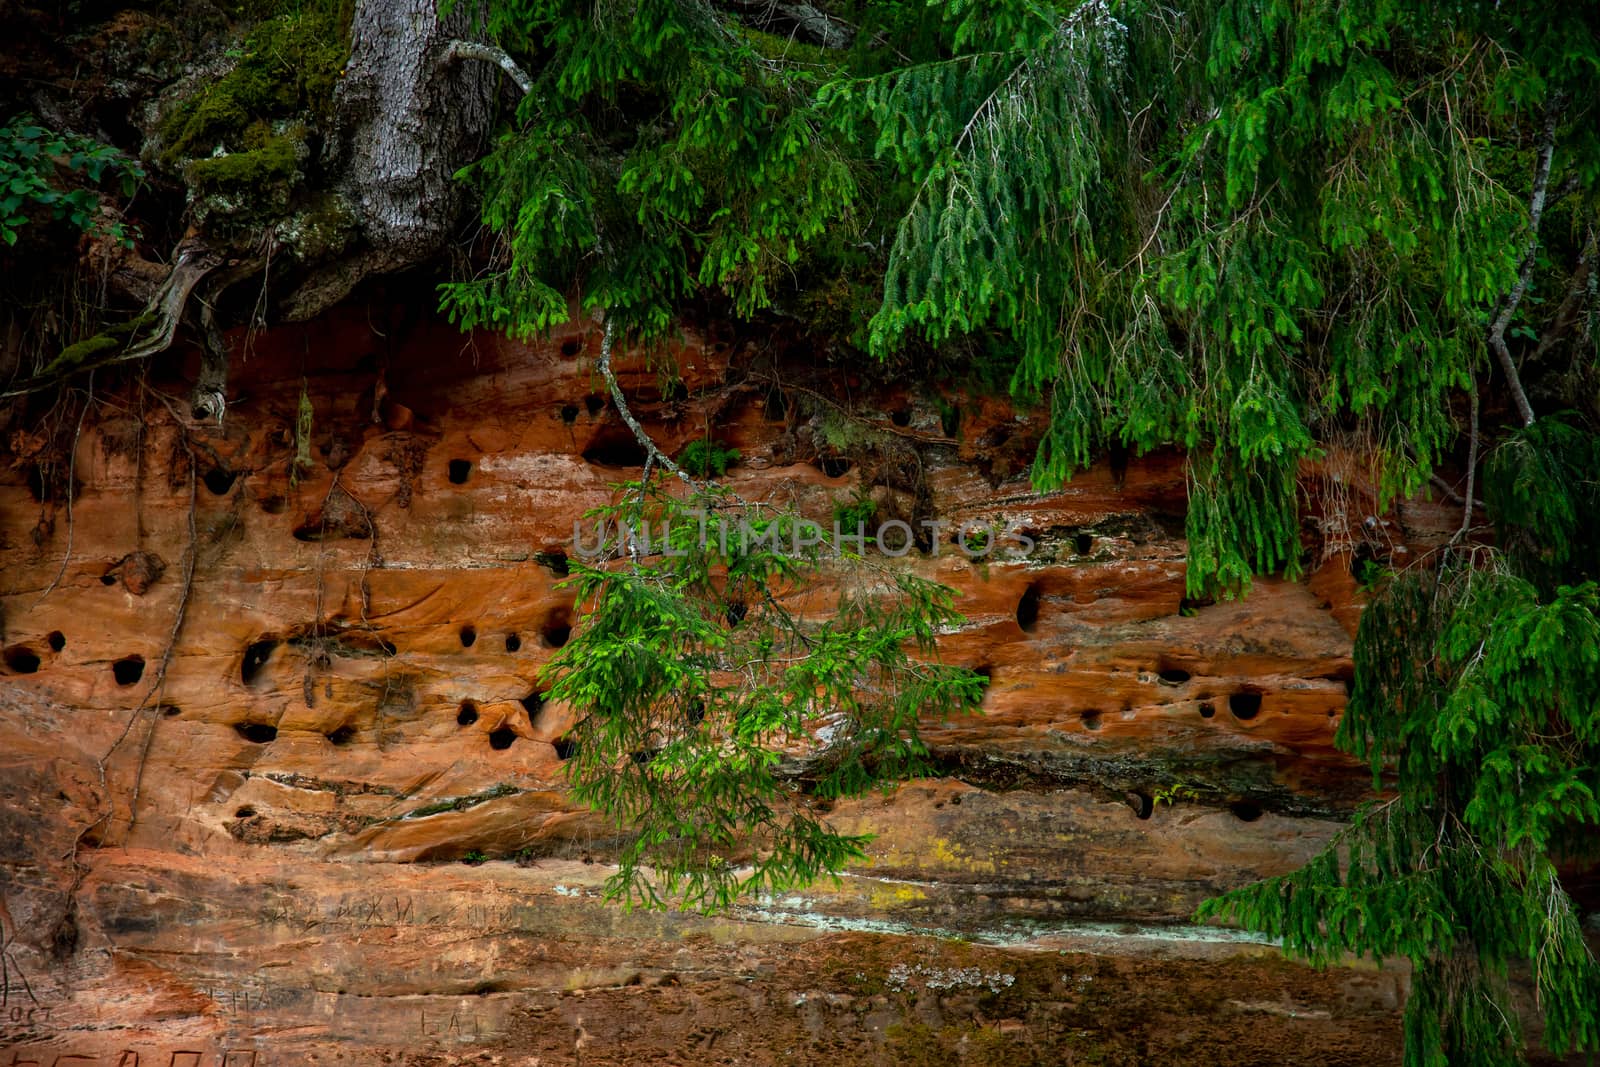 Closeup of sandstone cliffs and trees near the river Gauja in Latvia. Sedimentary rock consisting of sand or quartz grains cemented together.